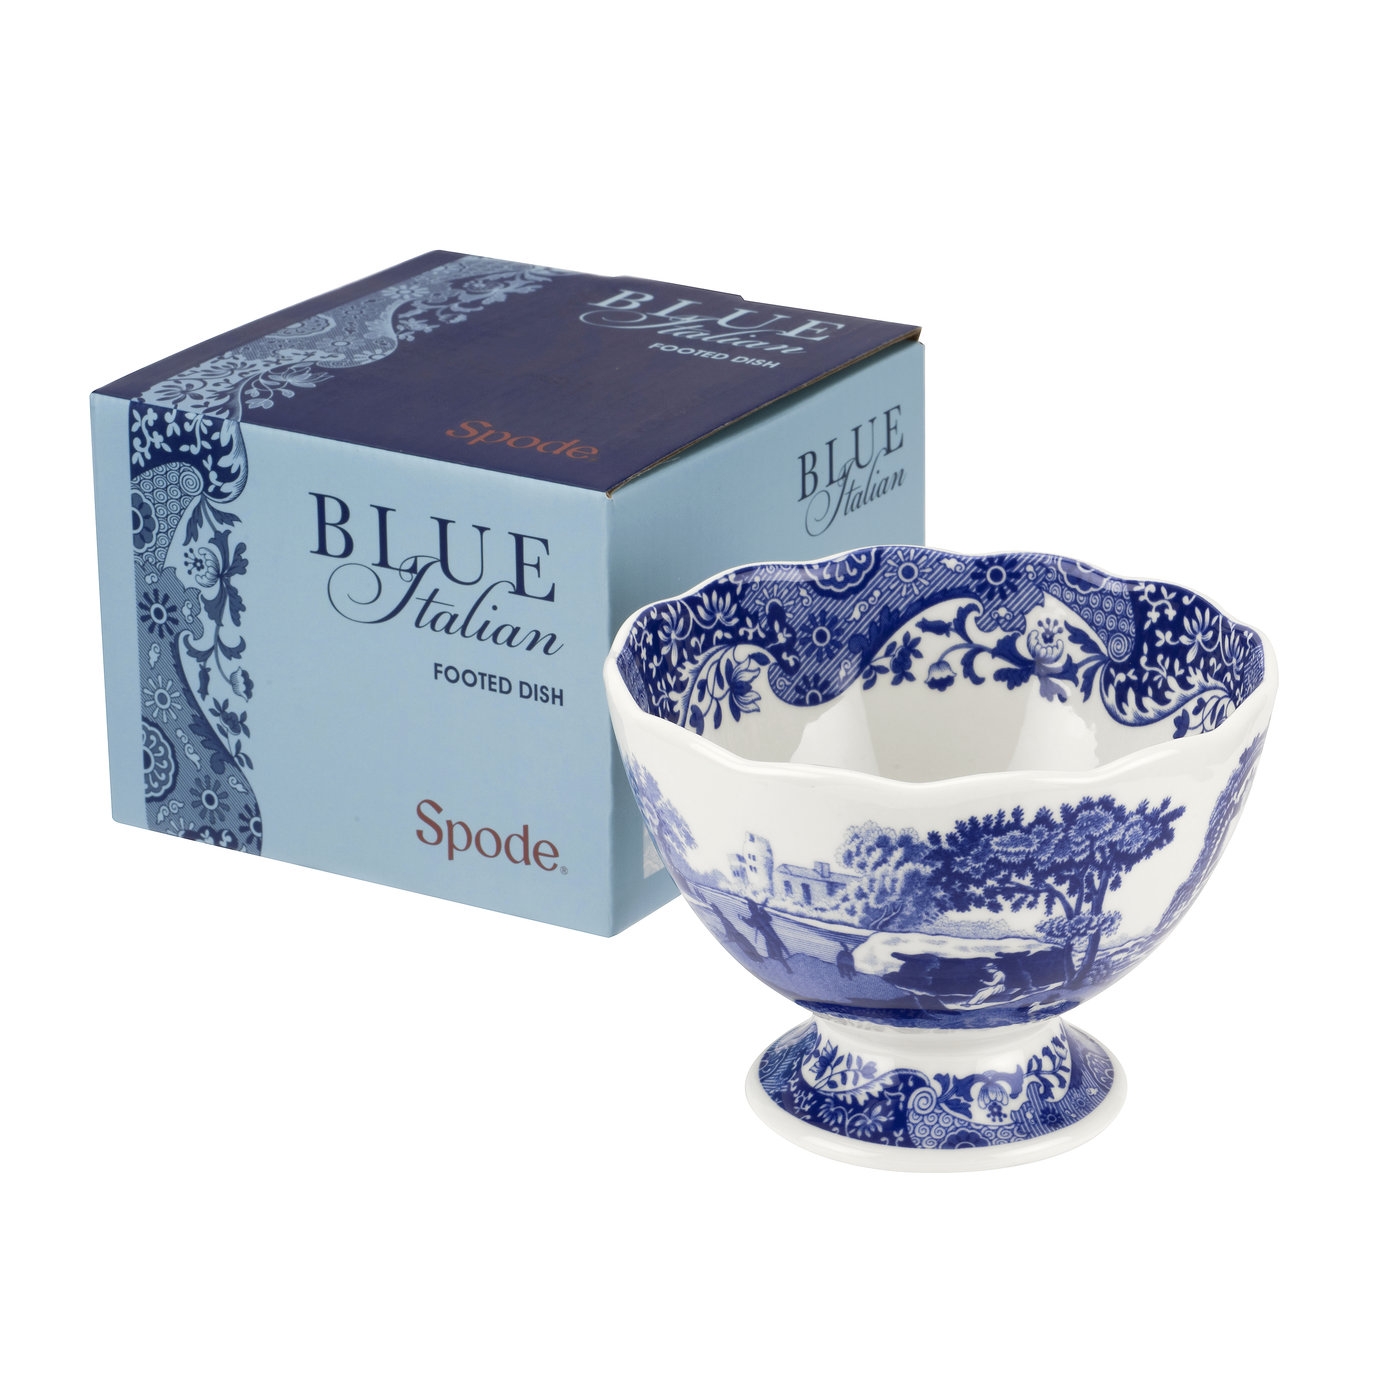 Spode Blue Italian Footed Bowl 